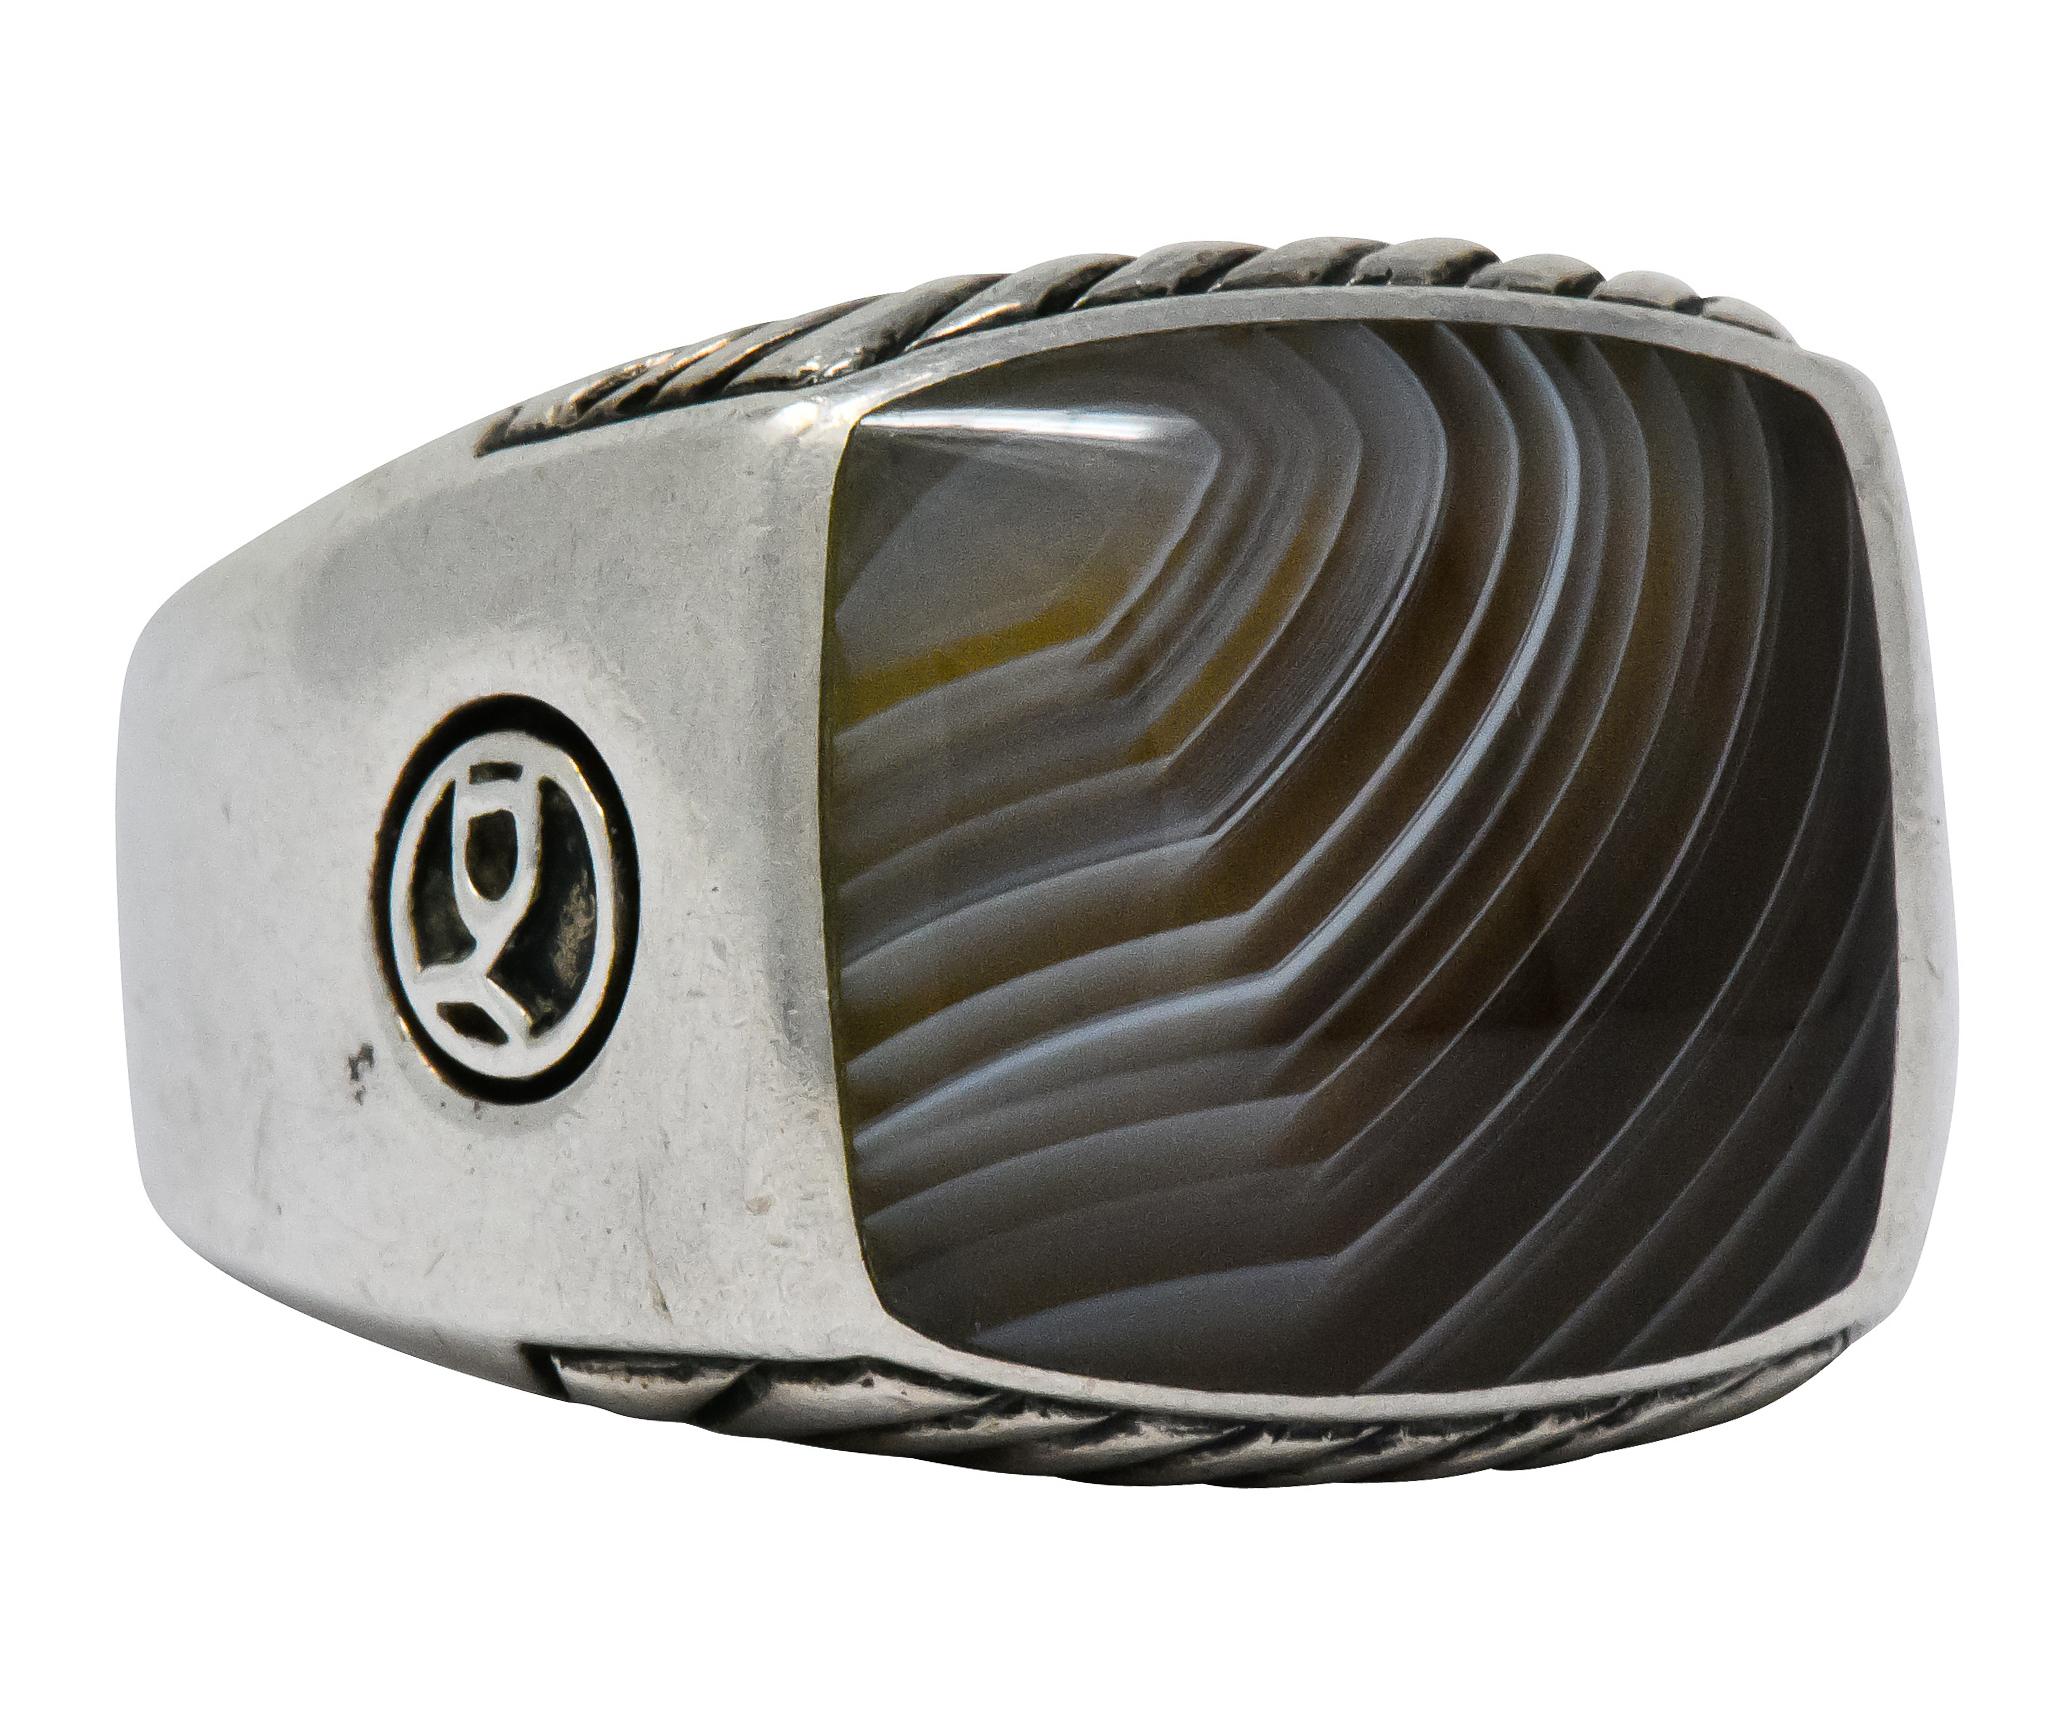 Centering an inlaid square slice of agate, translucent grayish-brown with white banding and excellent polish

Natural agate pattern in concentric rings radiating outward

Accompanied by ribbed silver pattern on profile faces

From David Yurman's